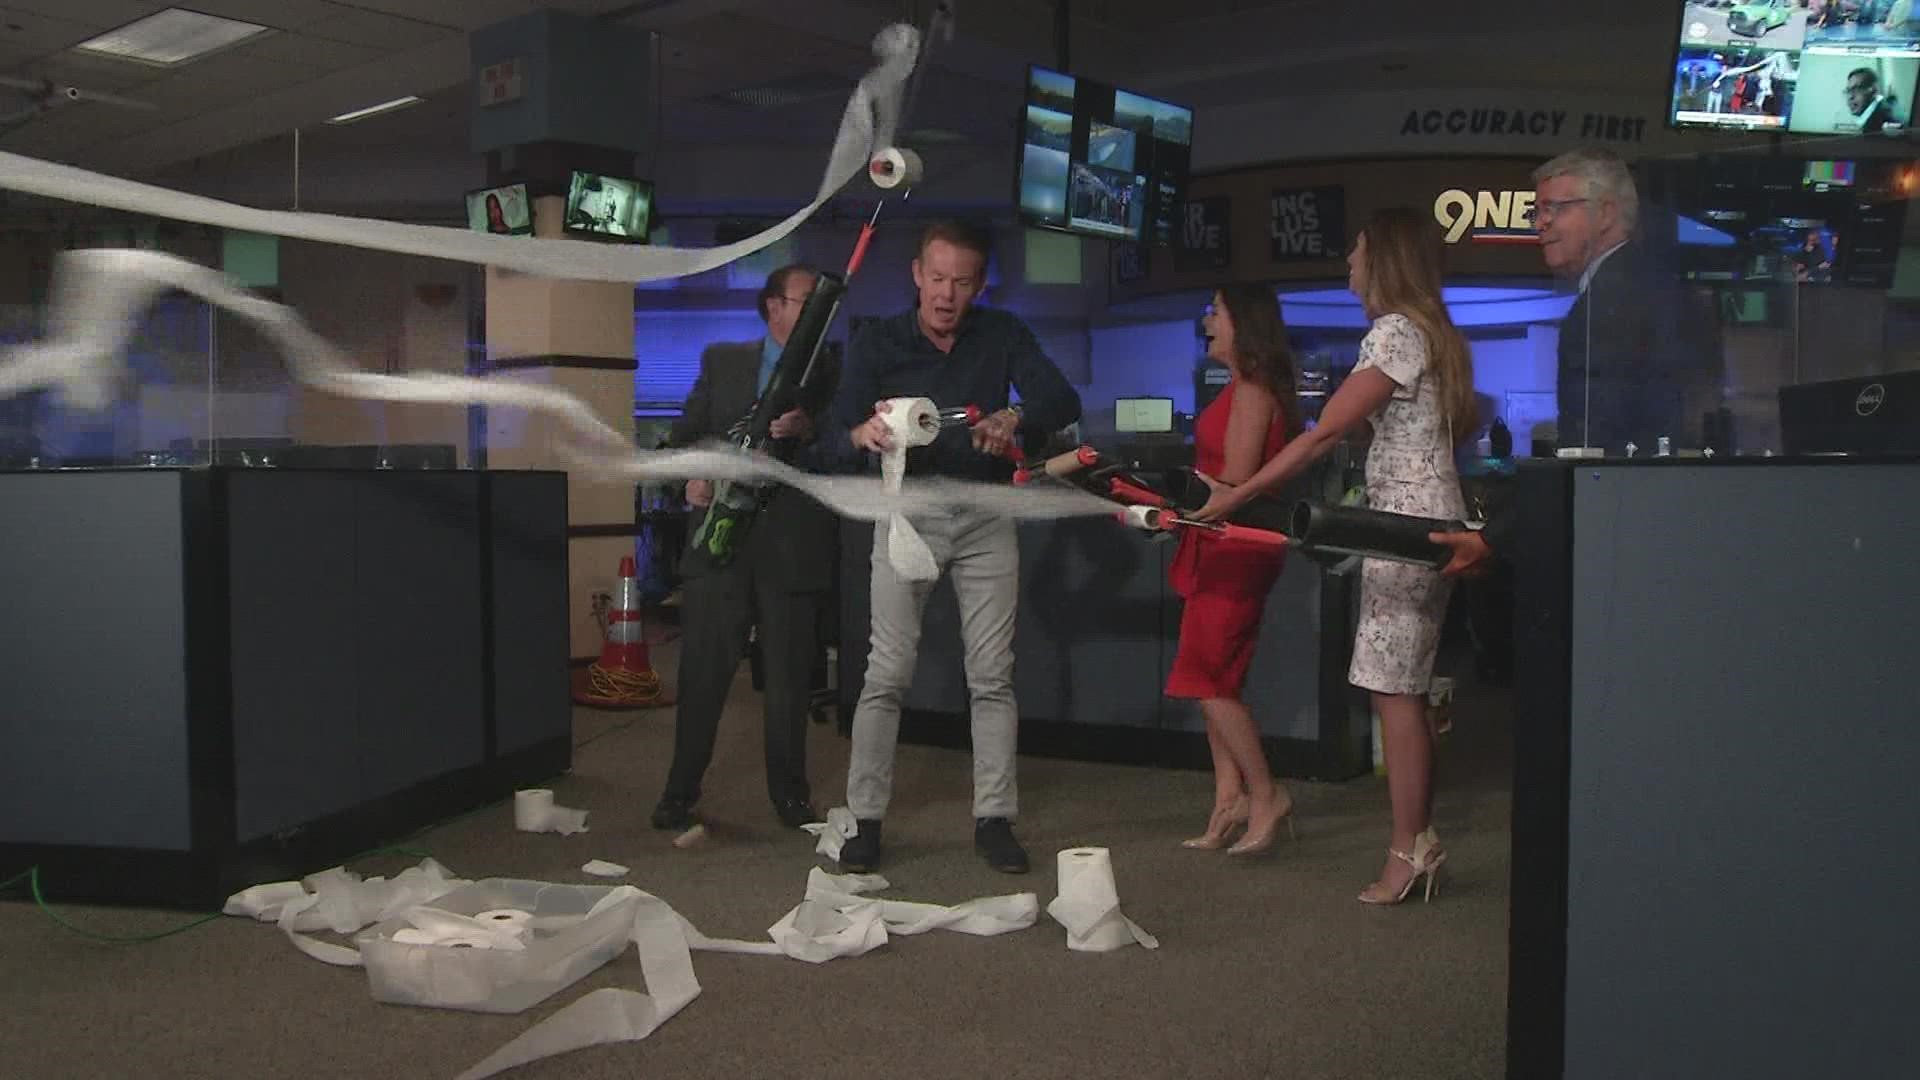 Science guy Steve Spangler shows the 9NEWS morning crew a fun toilet paper launching experiment that created quite the mess!